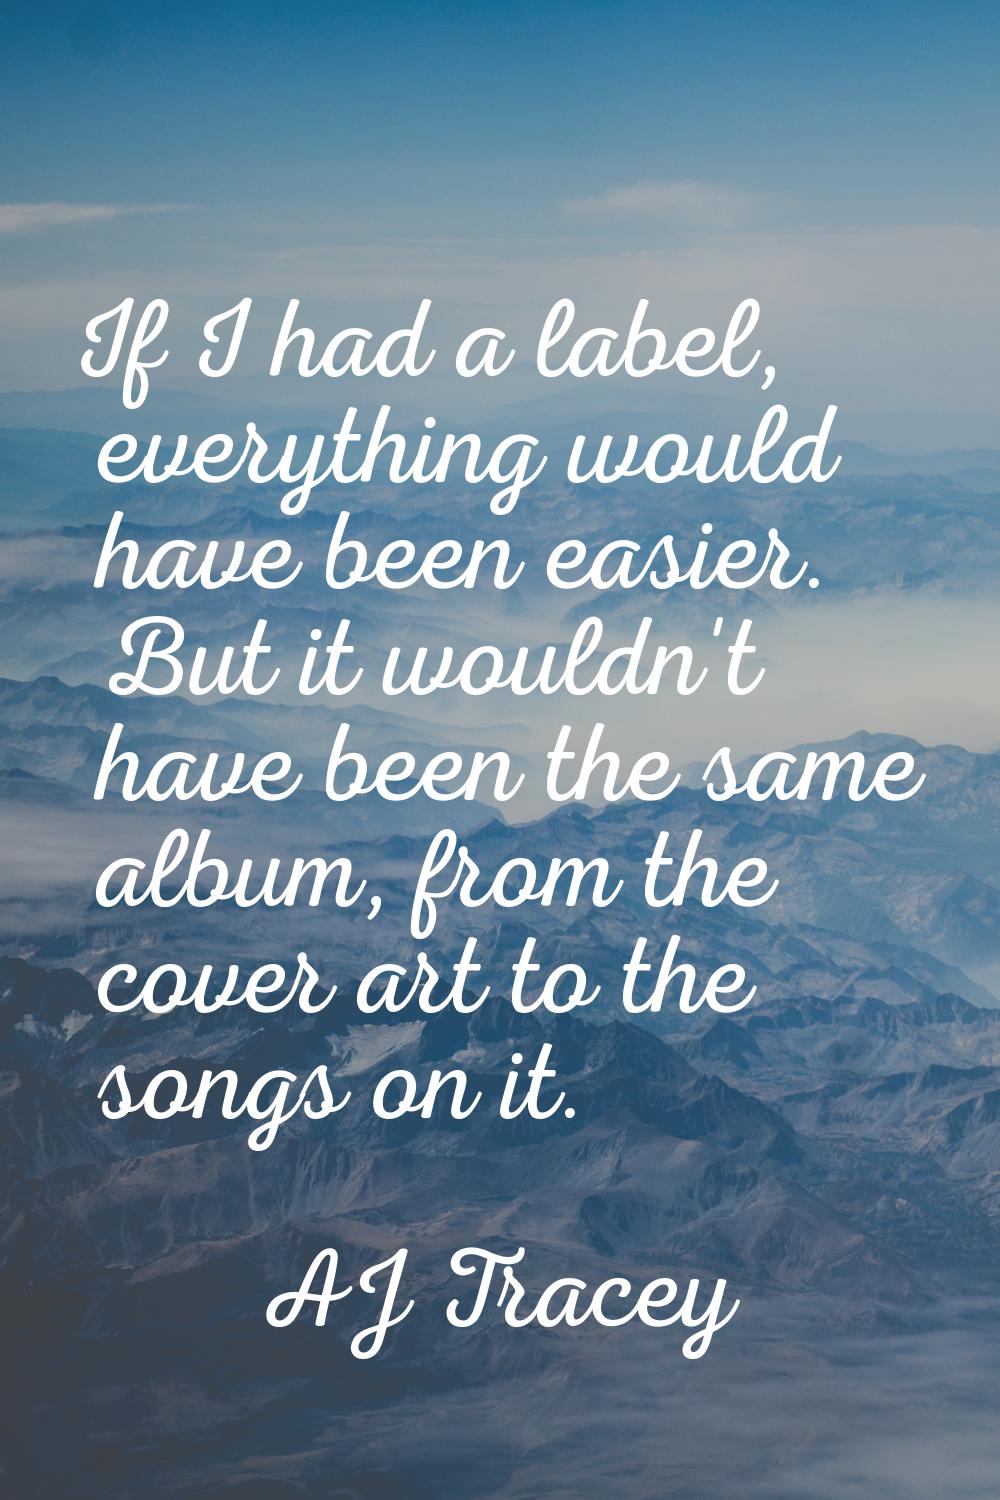 If I had a label, everything would have been easier. But it wouldn't have been the same album, from